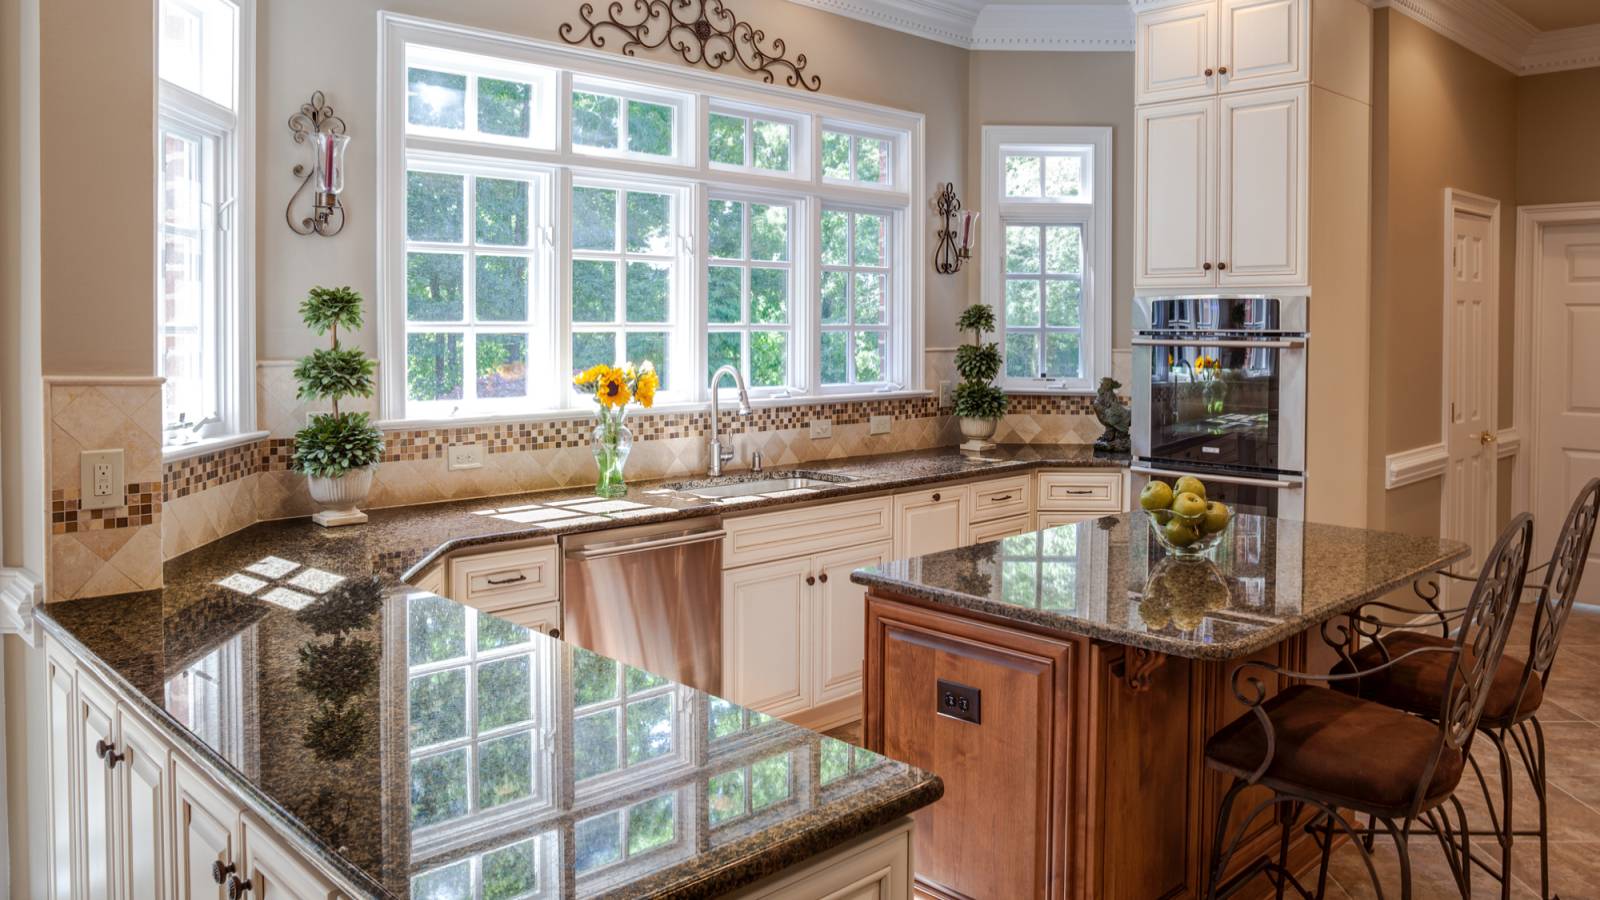 5 Ways to Keep Kitchen Remodeling Costs Down